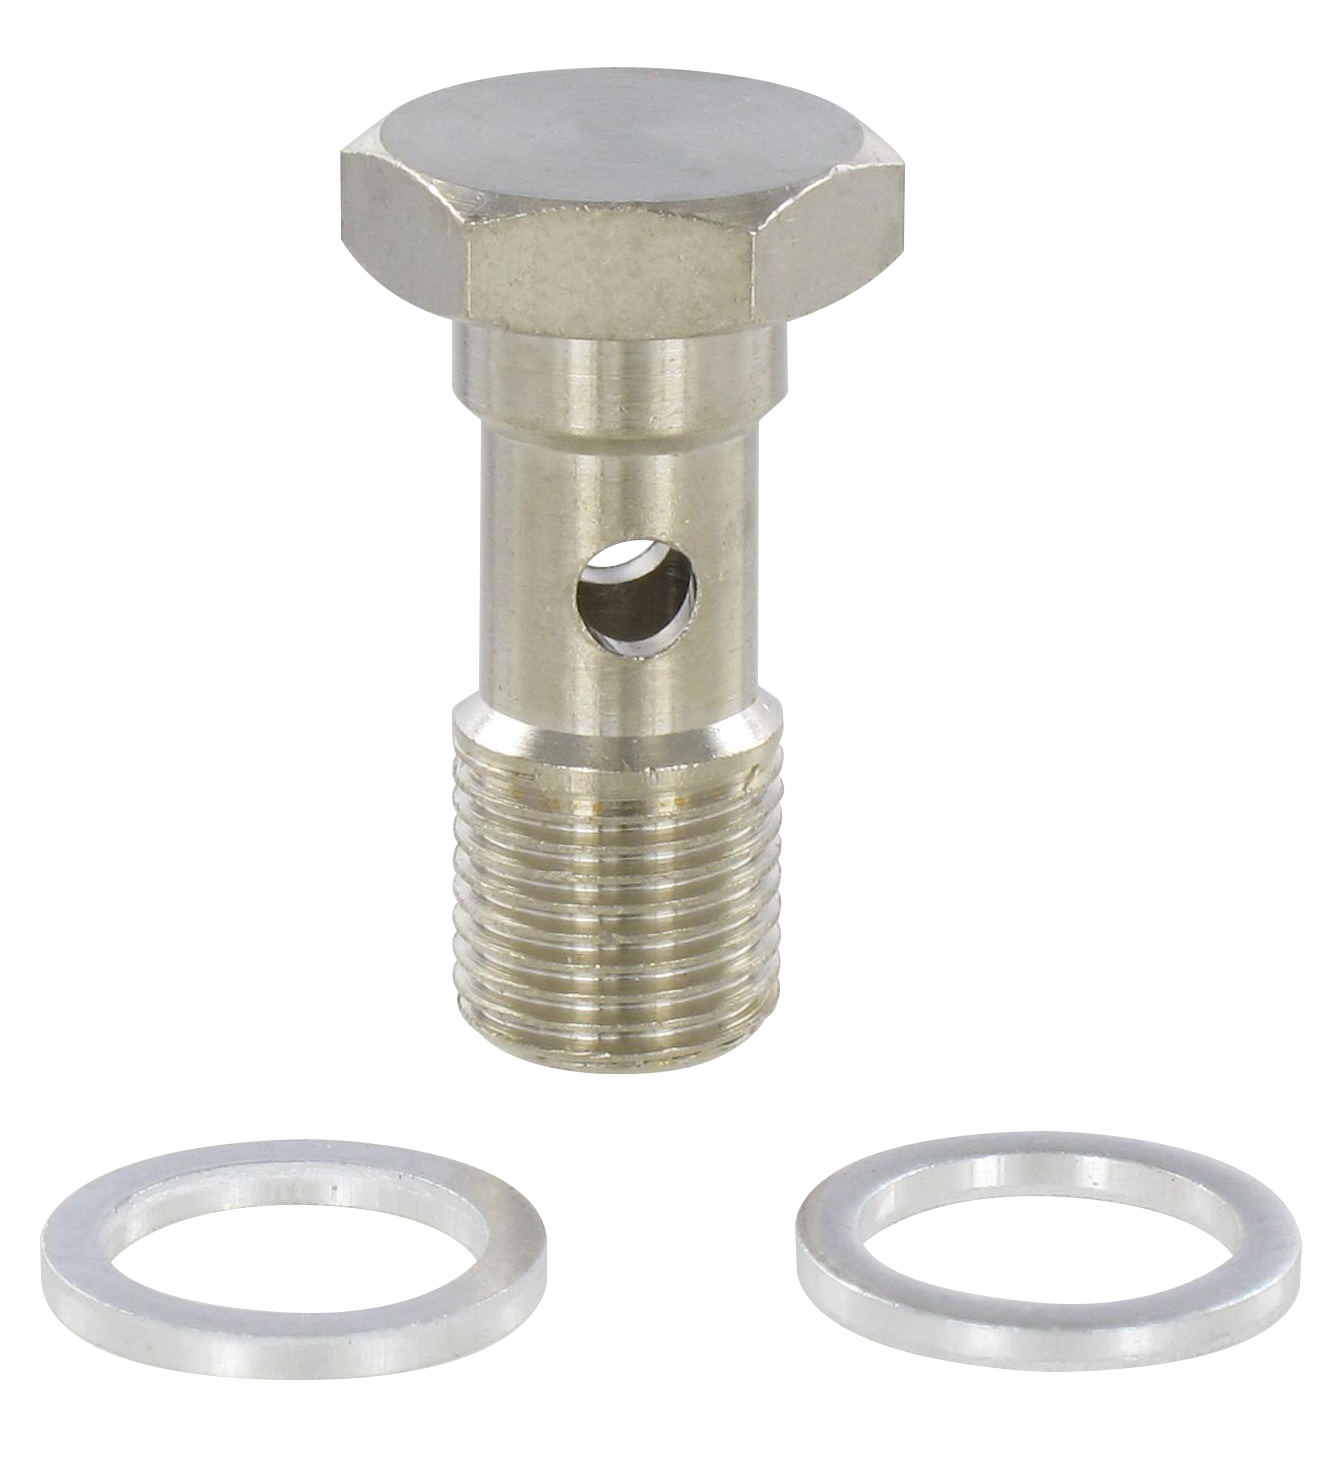 Banjo fittings SINGLE HOLLOW BOLT Fittings and quick-connect couplings